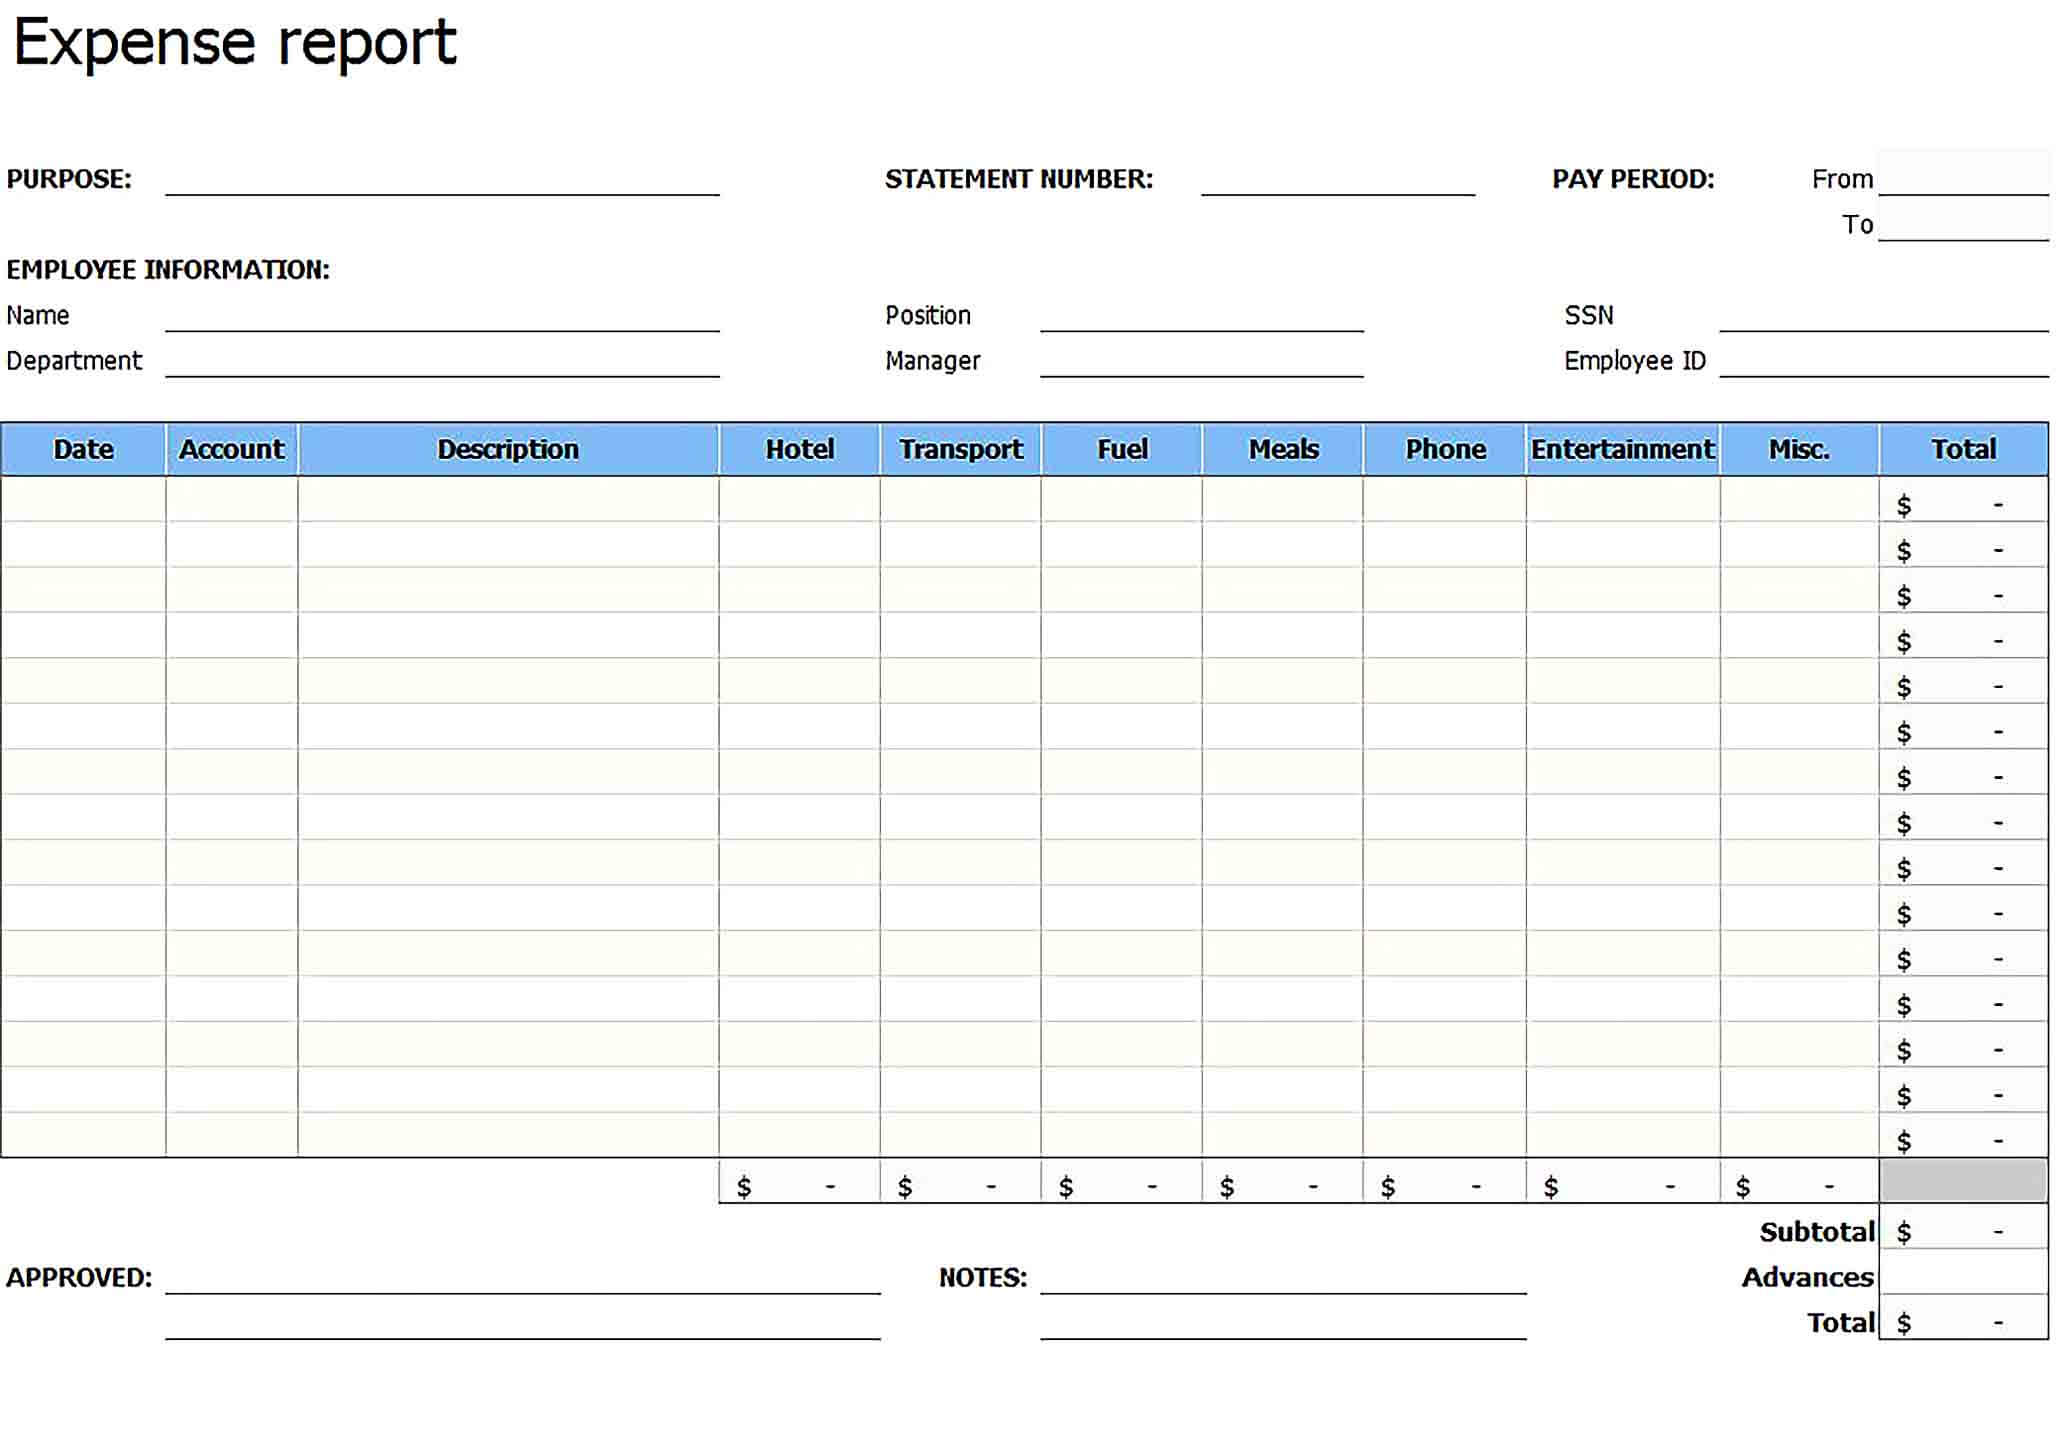 Sample Expense Report Template Excel